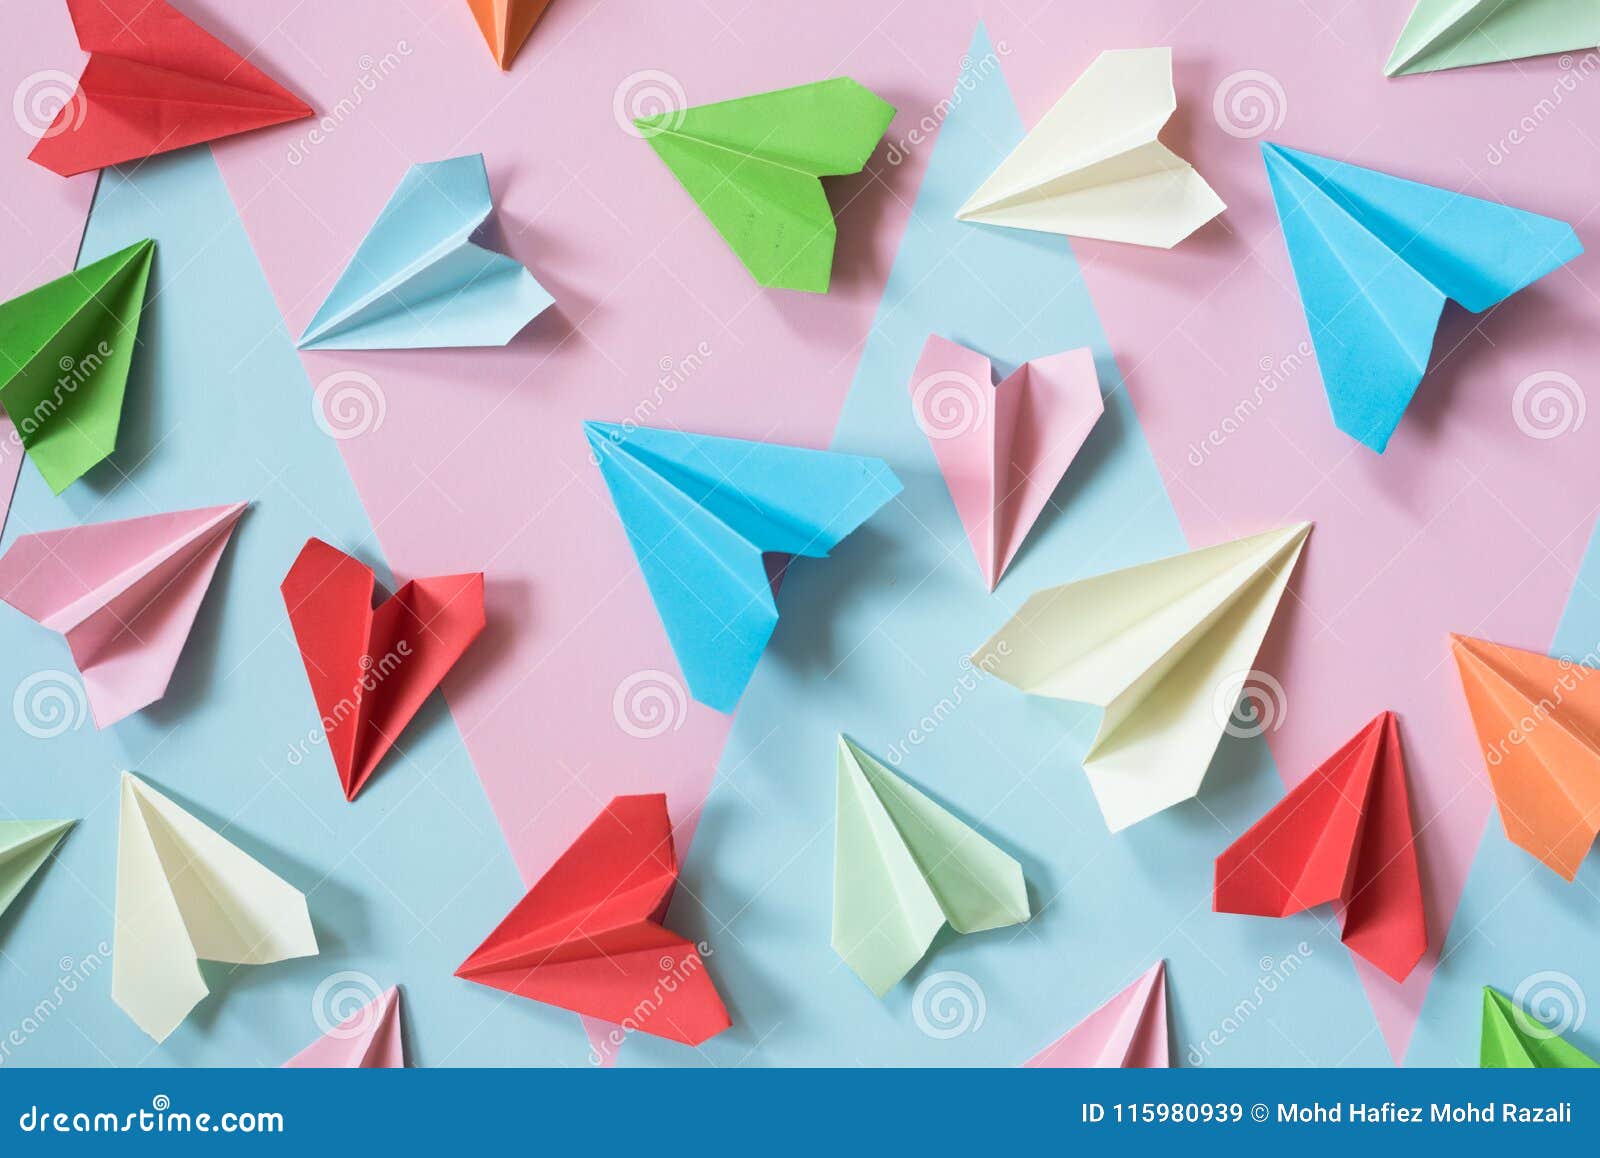 colorful paper airplanes on pastel pink and blue colored background